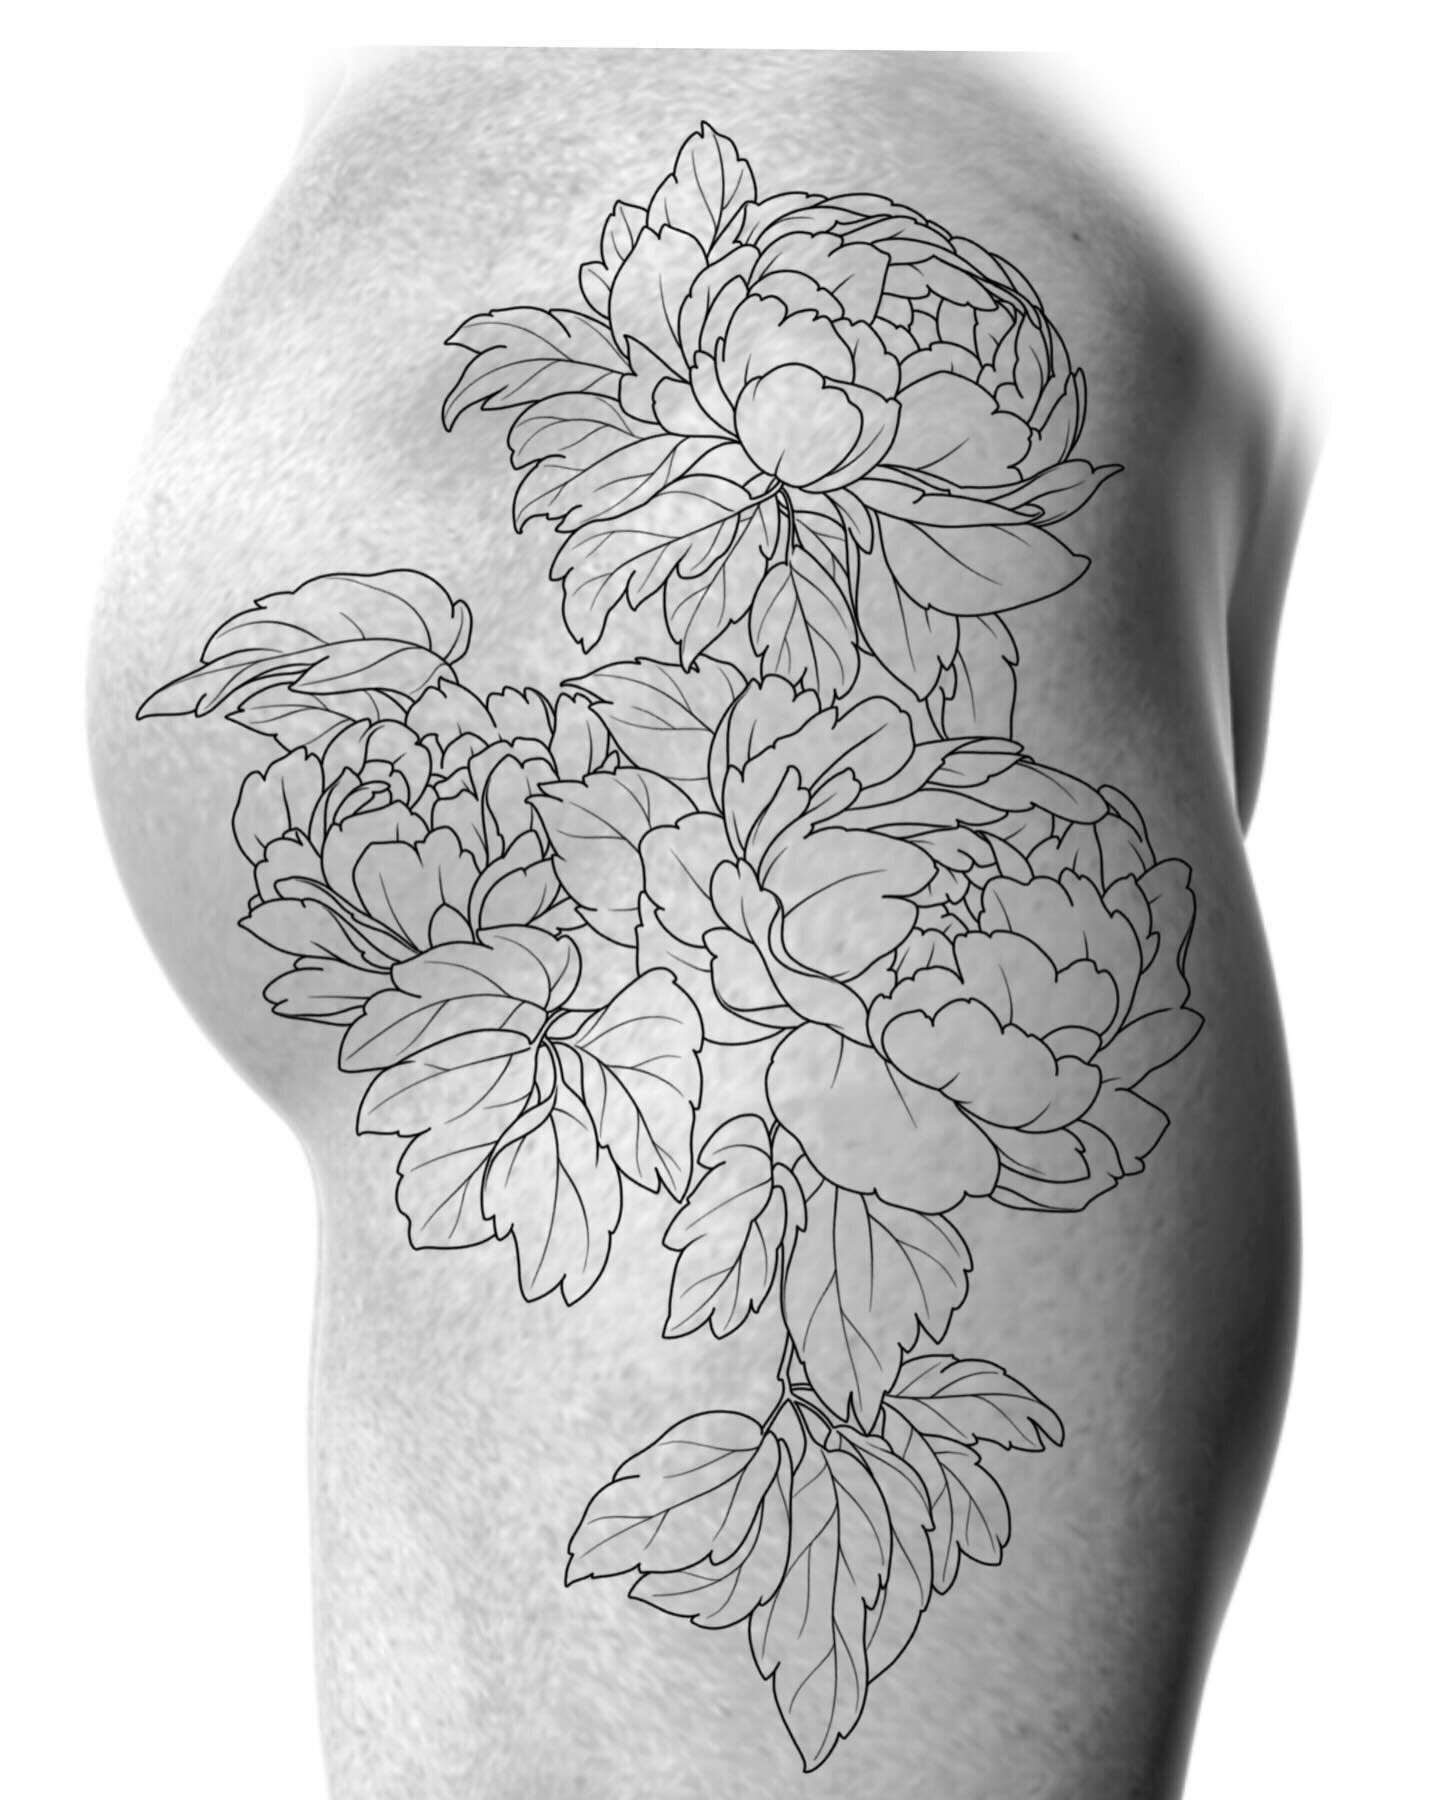 I would love to do this peony design on the hip in either black and gray or color. If you are interested in this design just call @inkedarts or DM me for booking details. Thanks for looking!!! #newtattoo #inked #tattooshop #tattooartist #tattooideas 